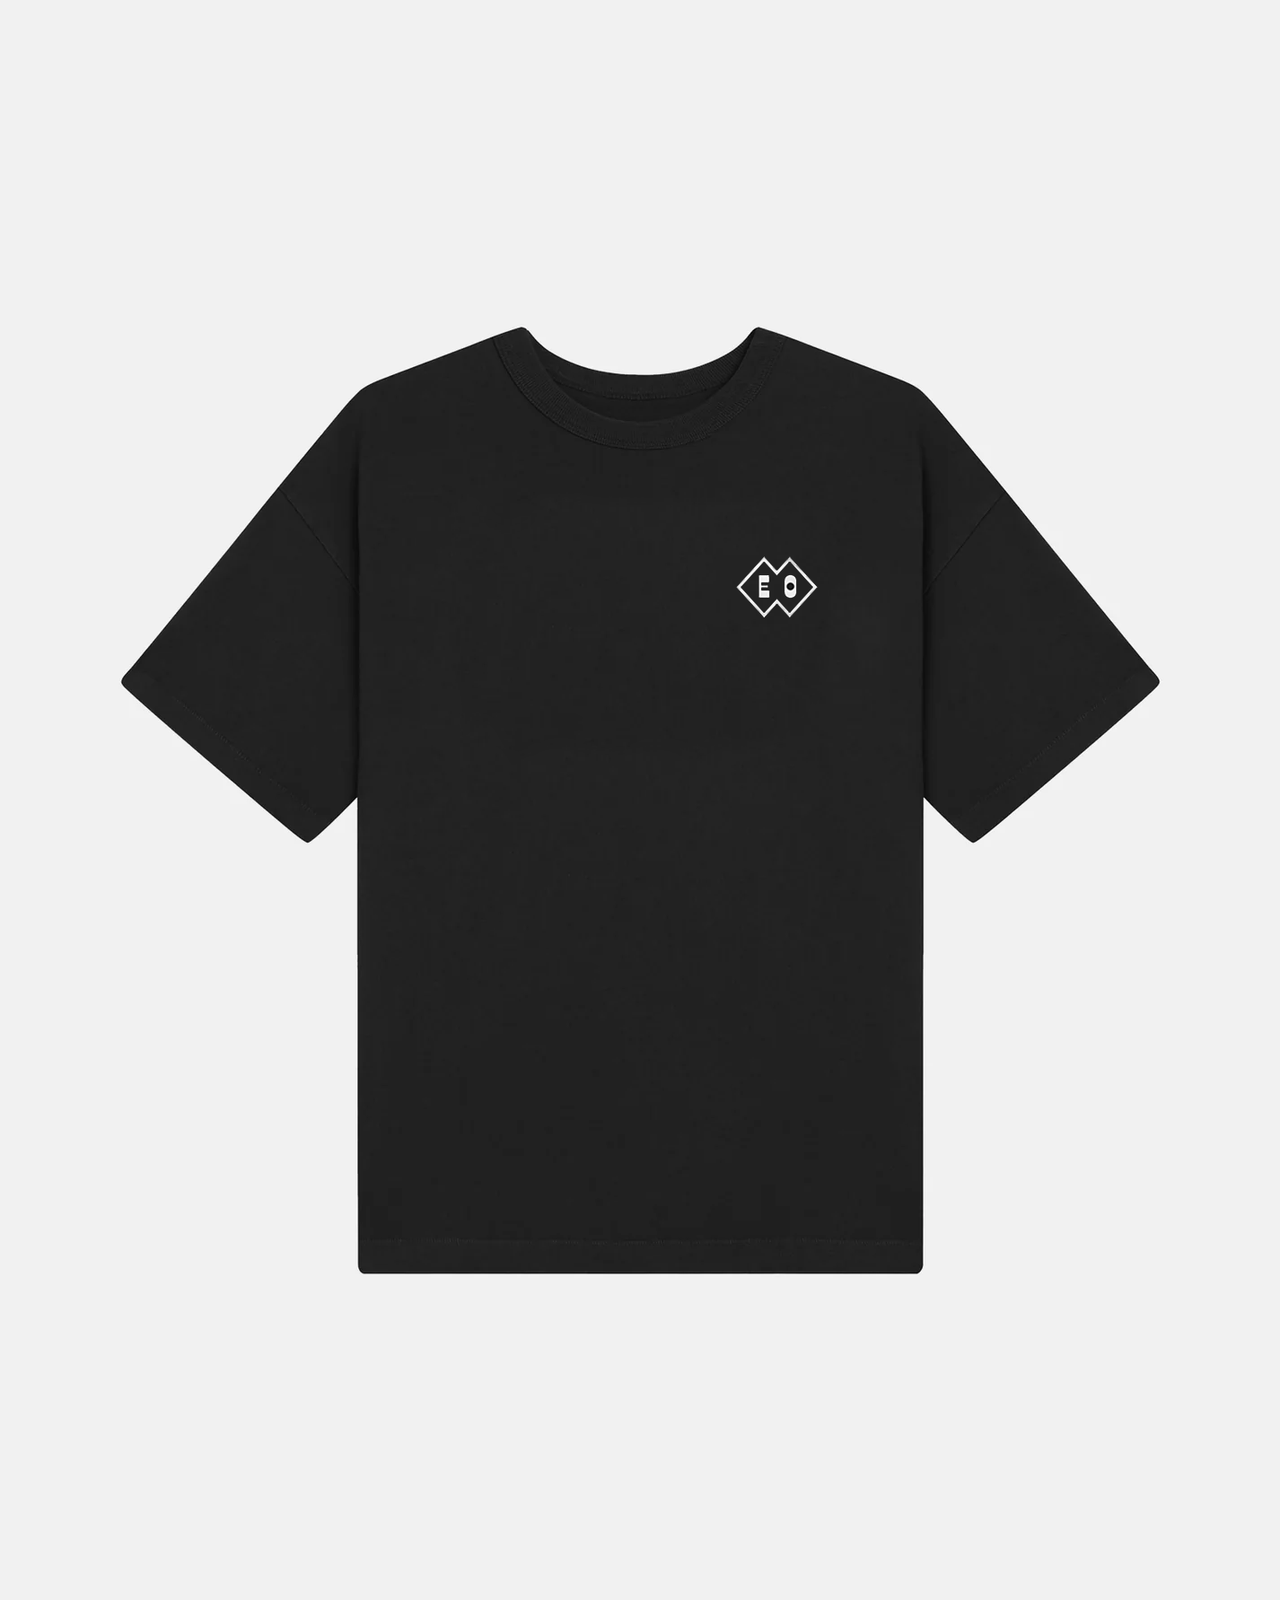 Experts Only Black Tee